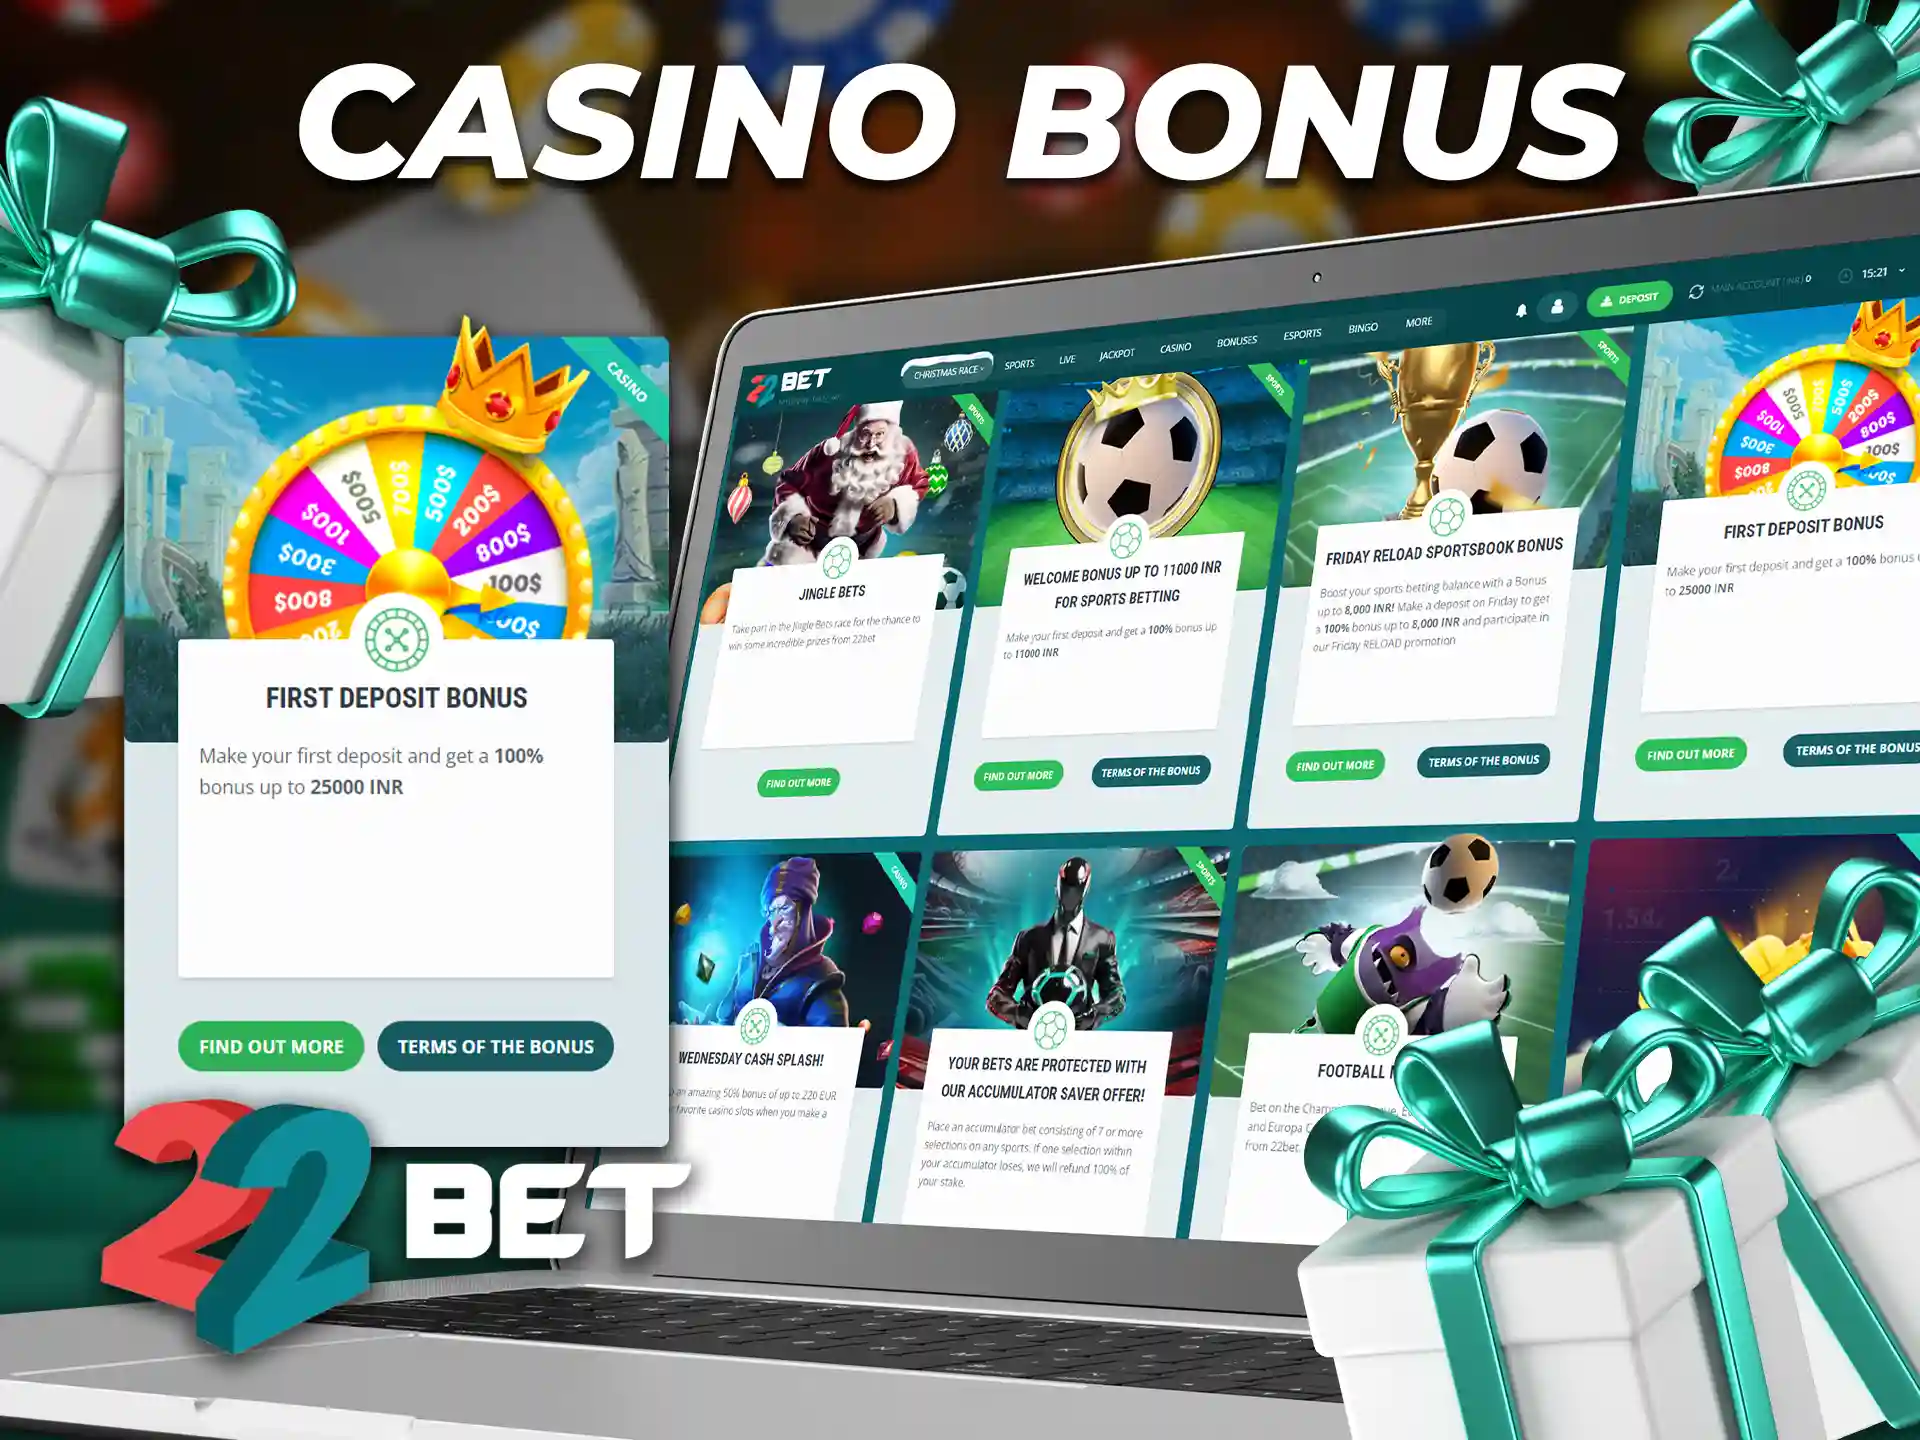 There is a unique welcome bonus for new 22Bet customers.